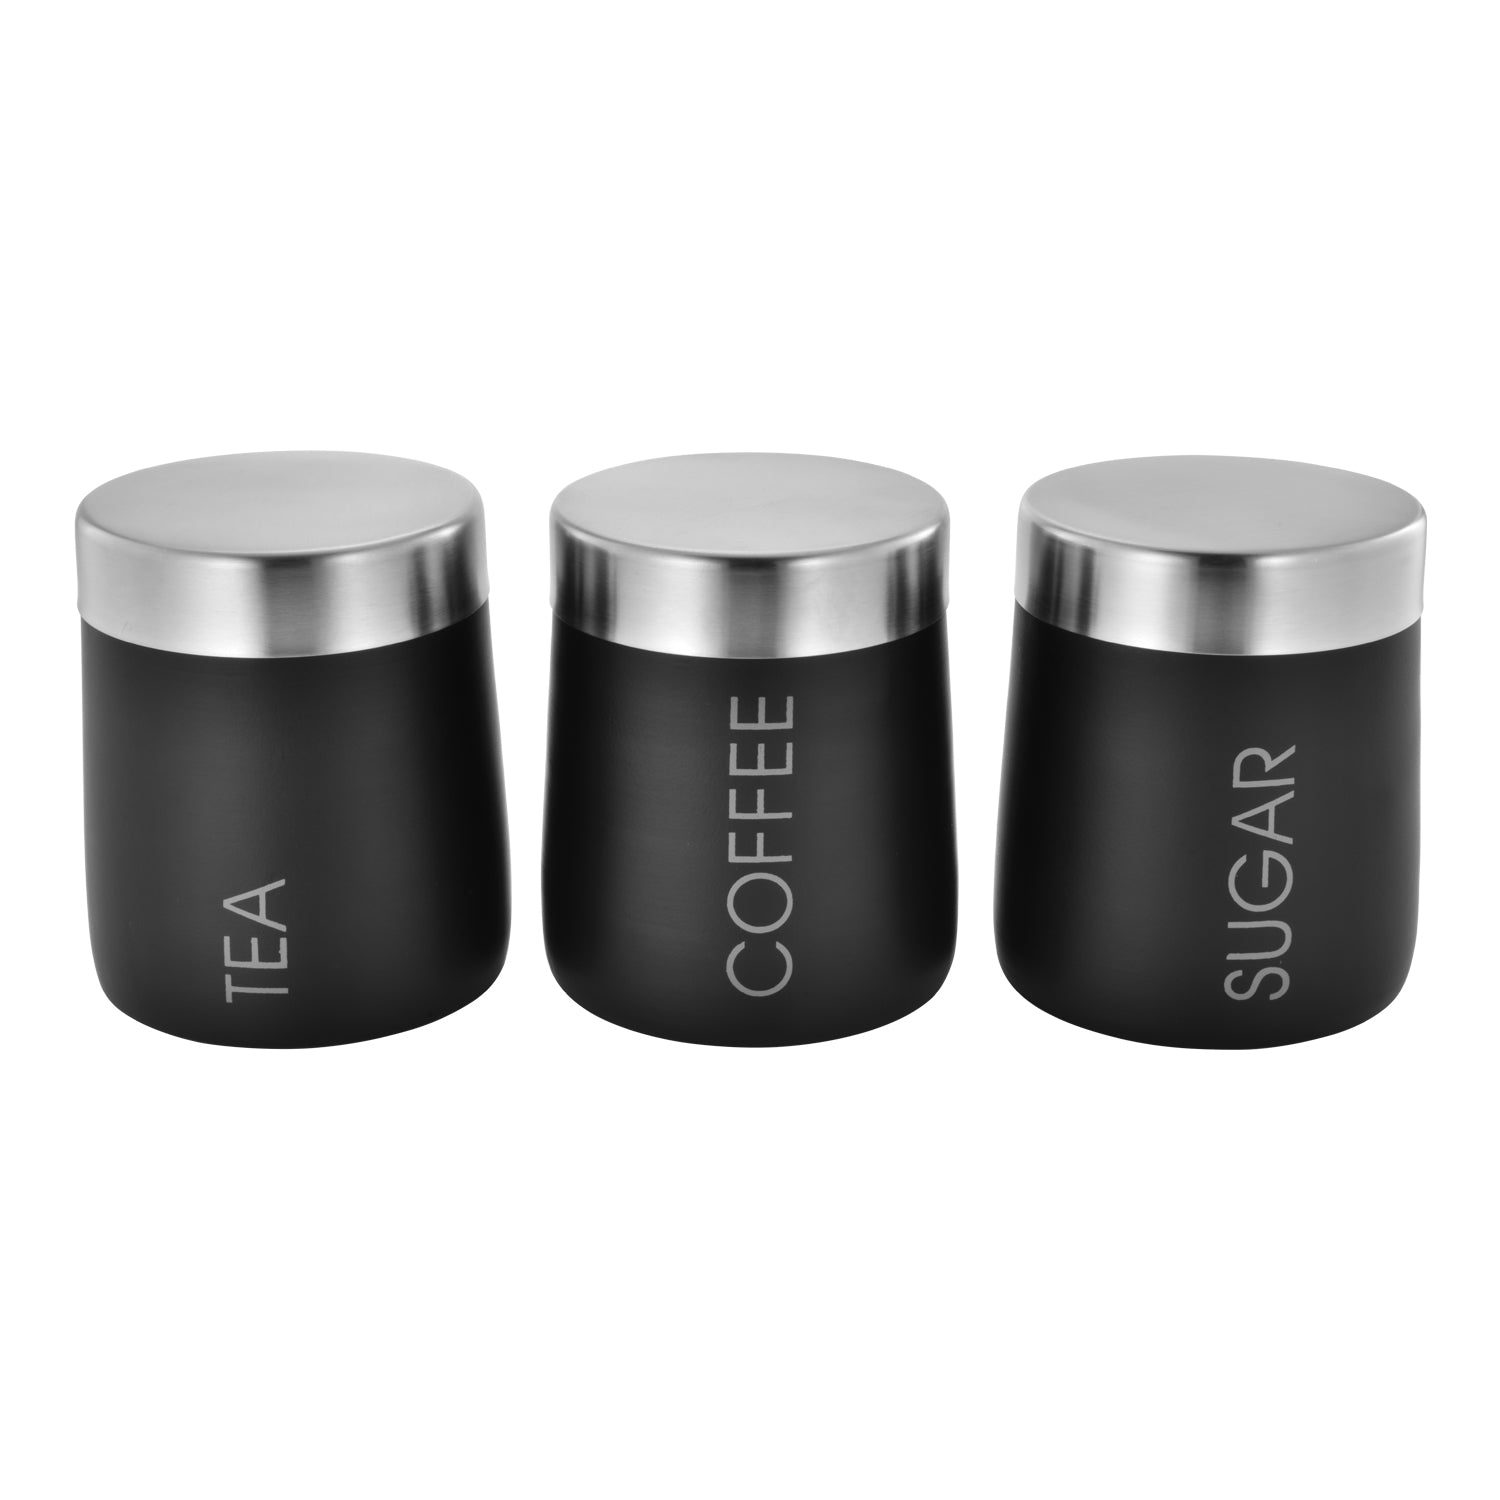 Canister Tea-Coffee-Sugar Conical Shaped Jar Black with S/S Lid 3pc